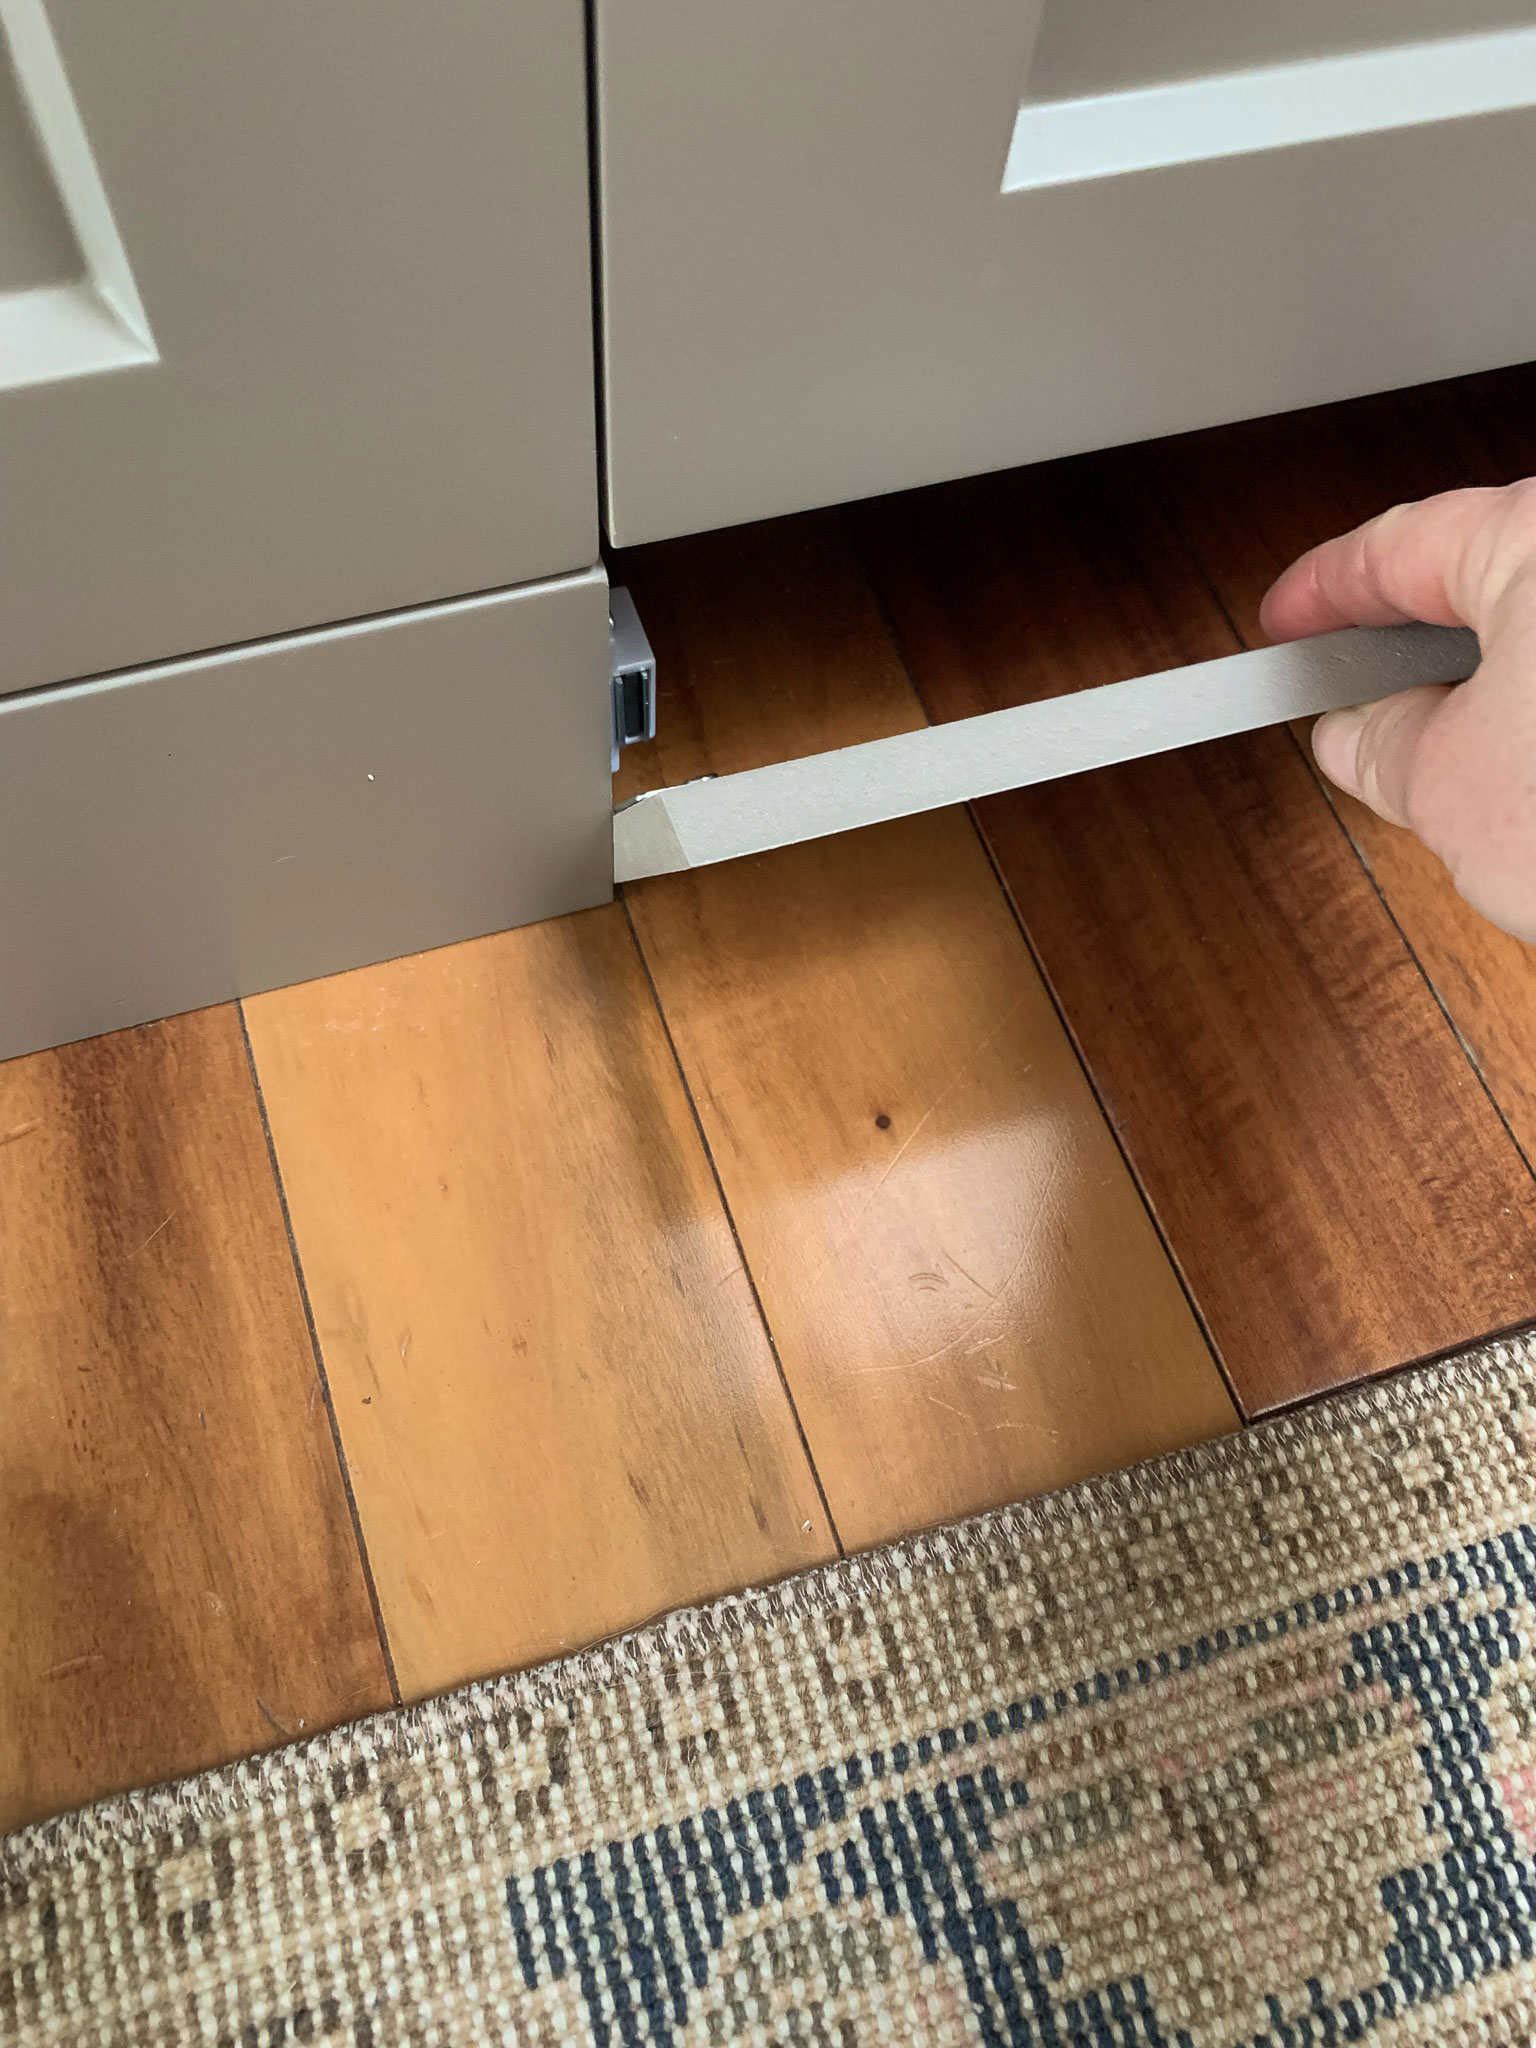 Removing a toe kick from infront of a dishwasher showing the magnets holding it in place